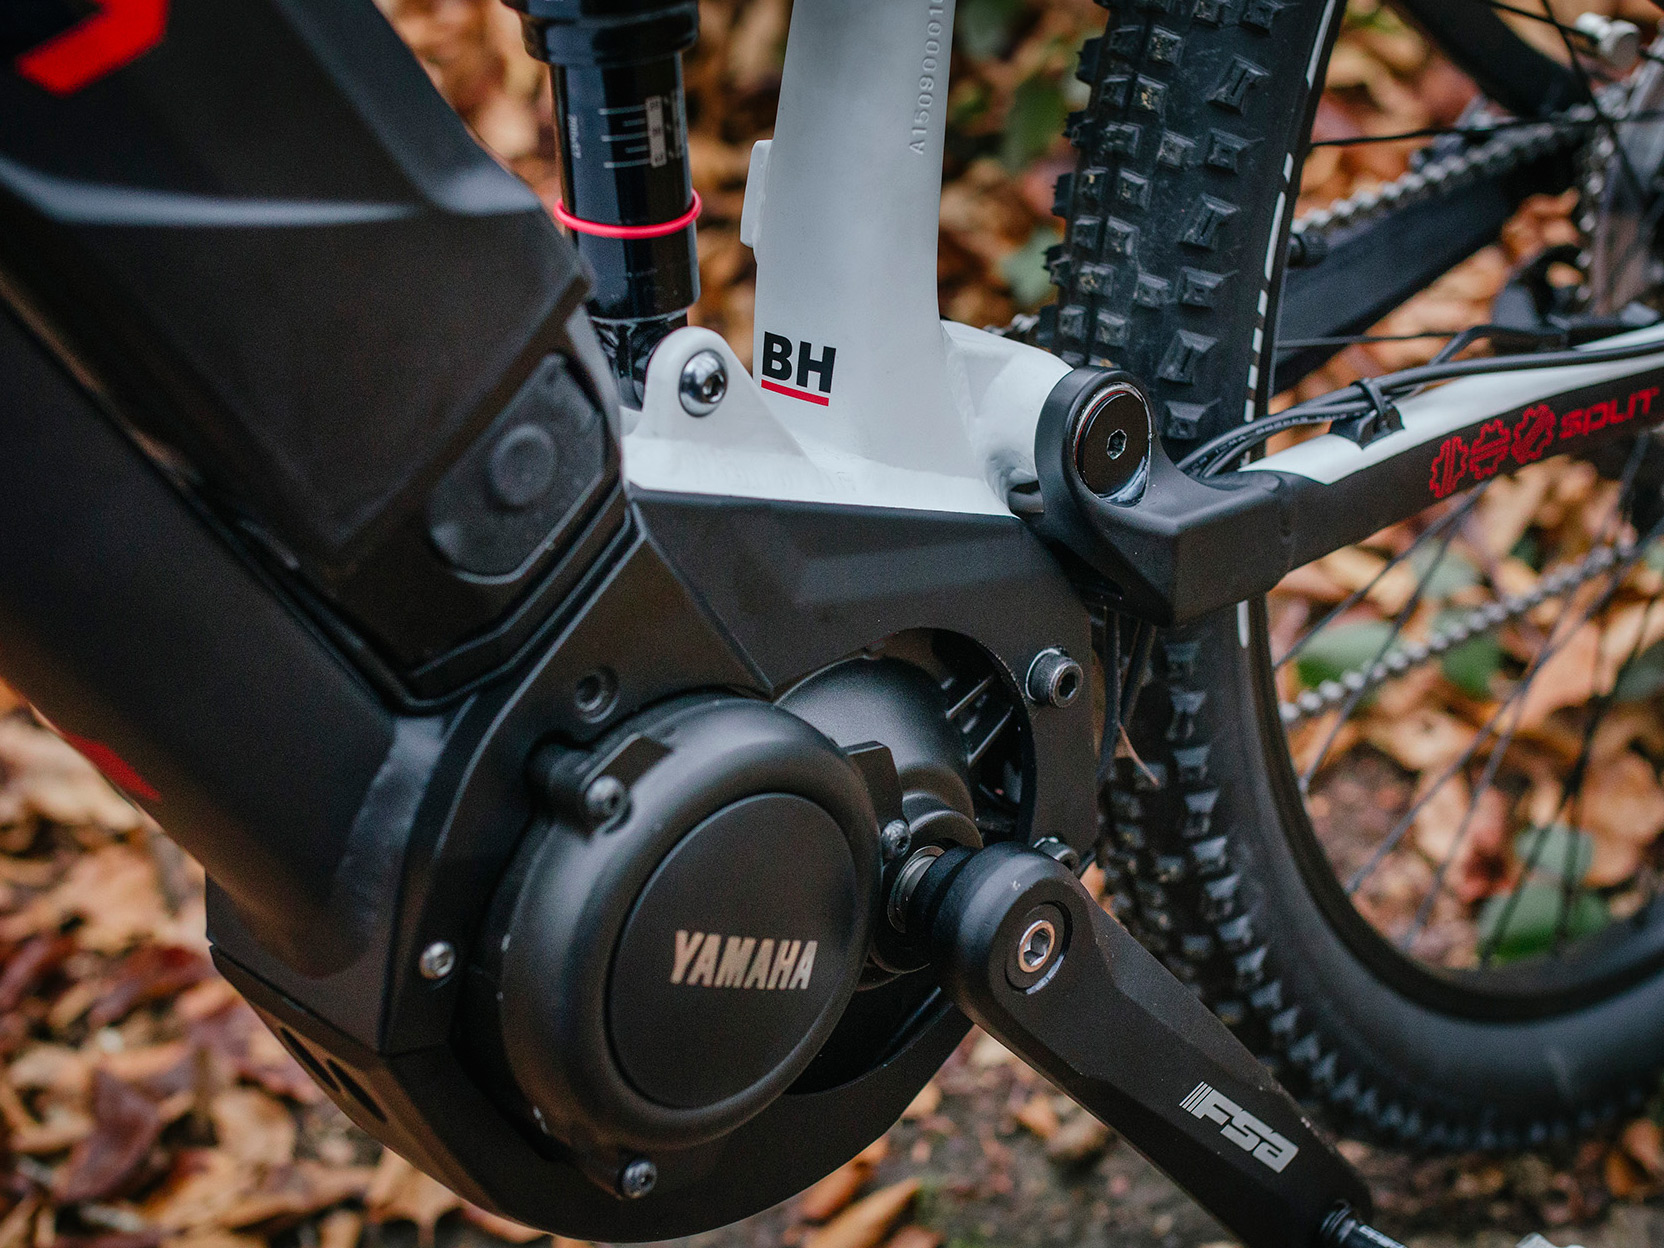 BH electrifies the trail with Yamaha powered e-Lynx and its Rebel family